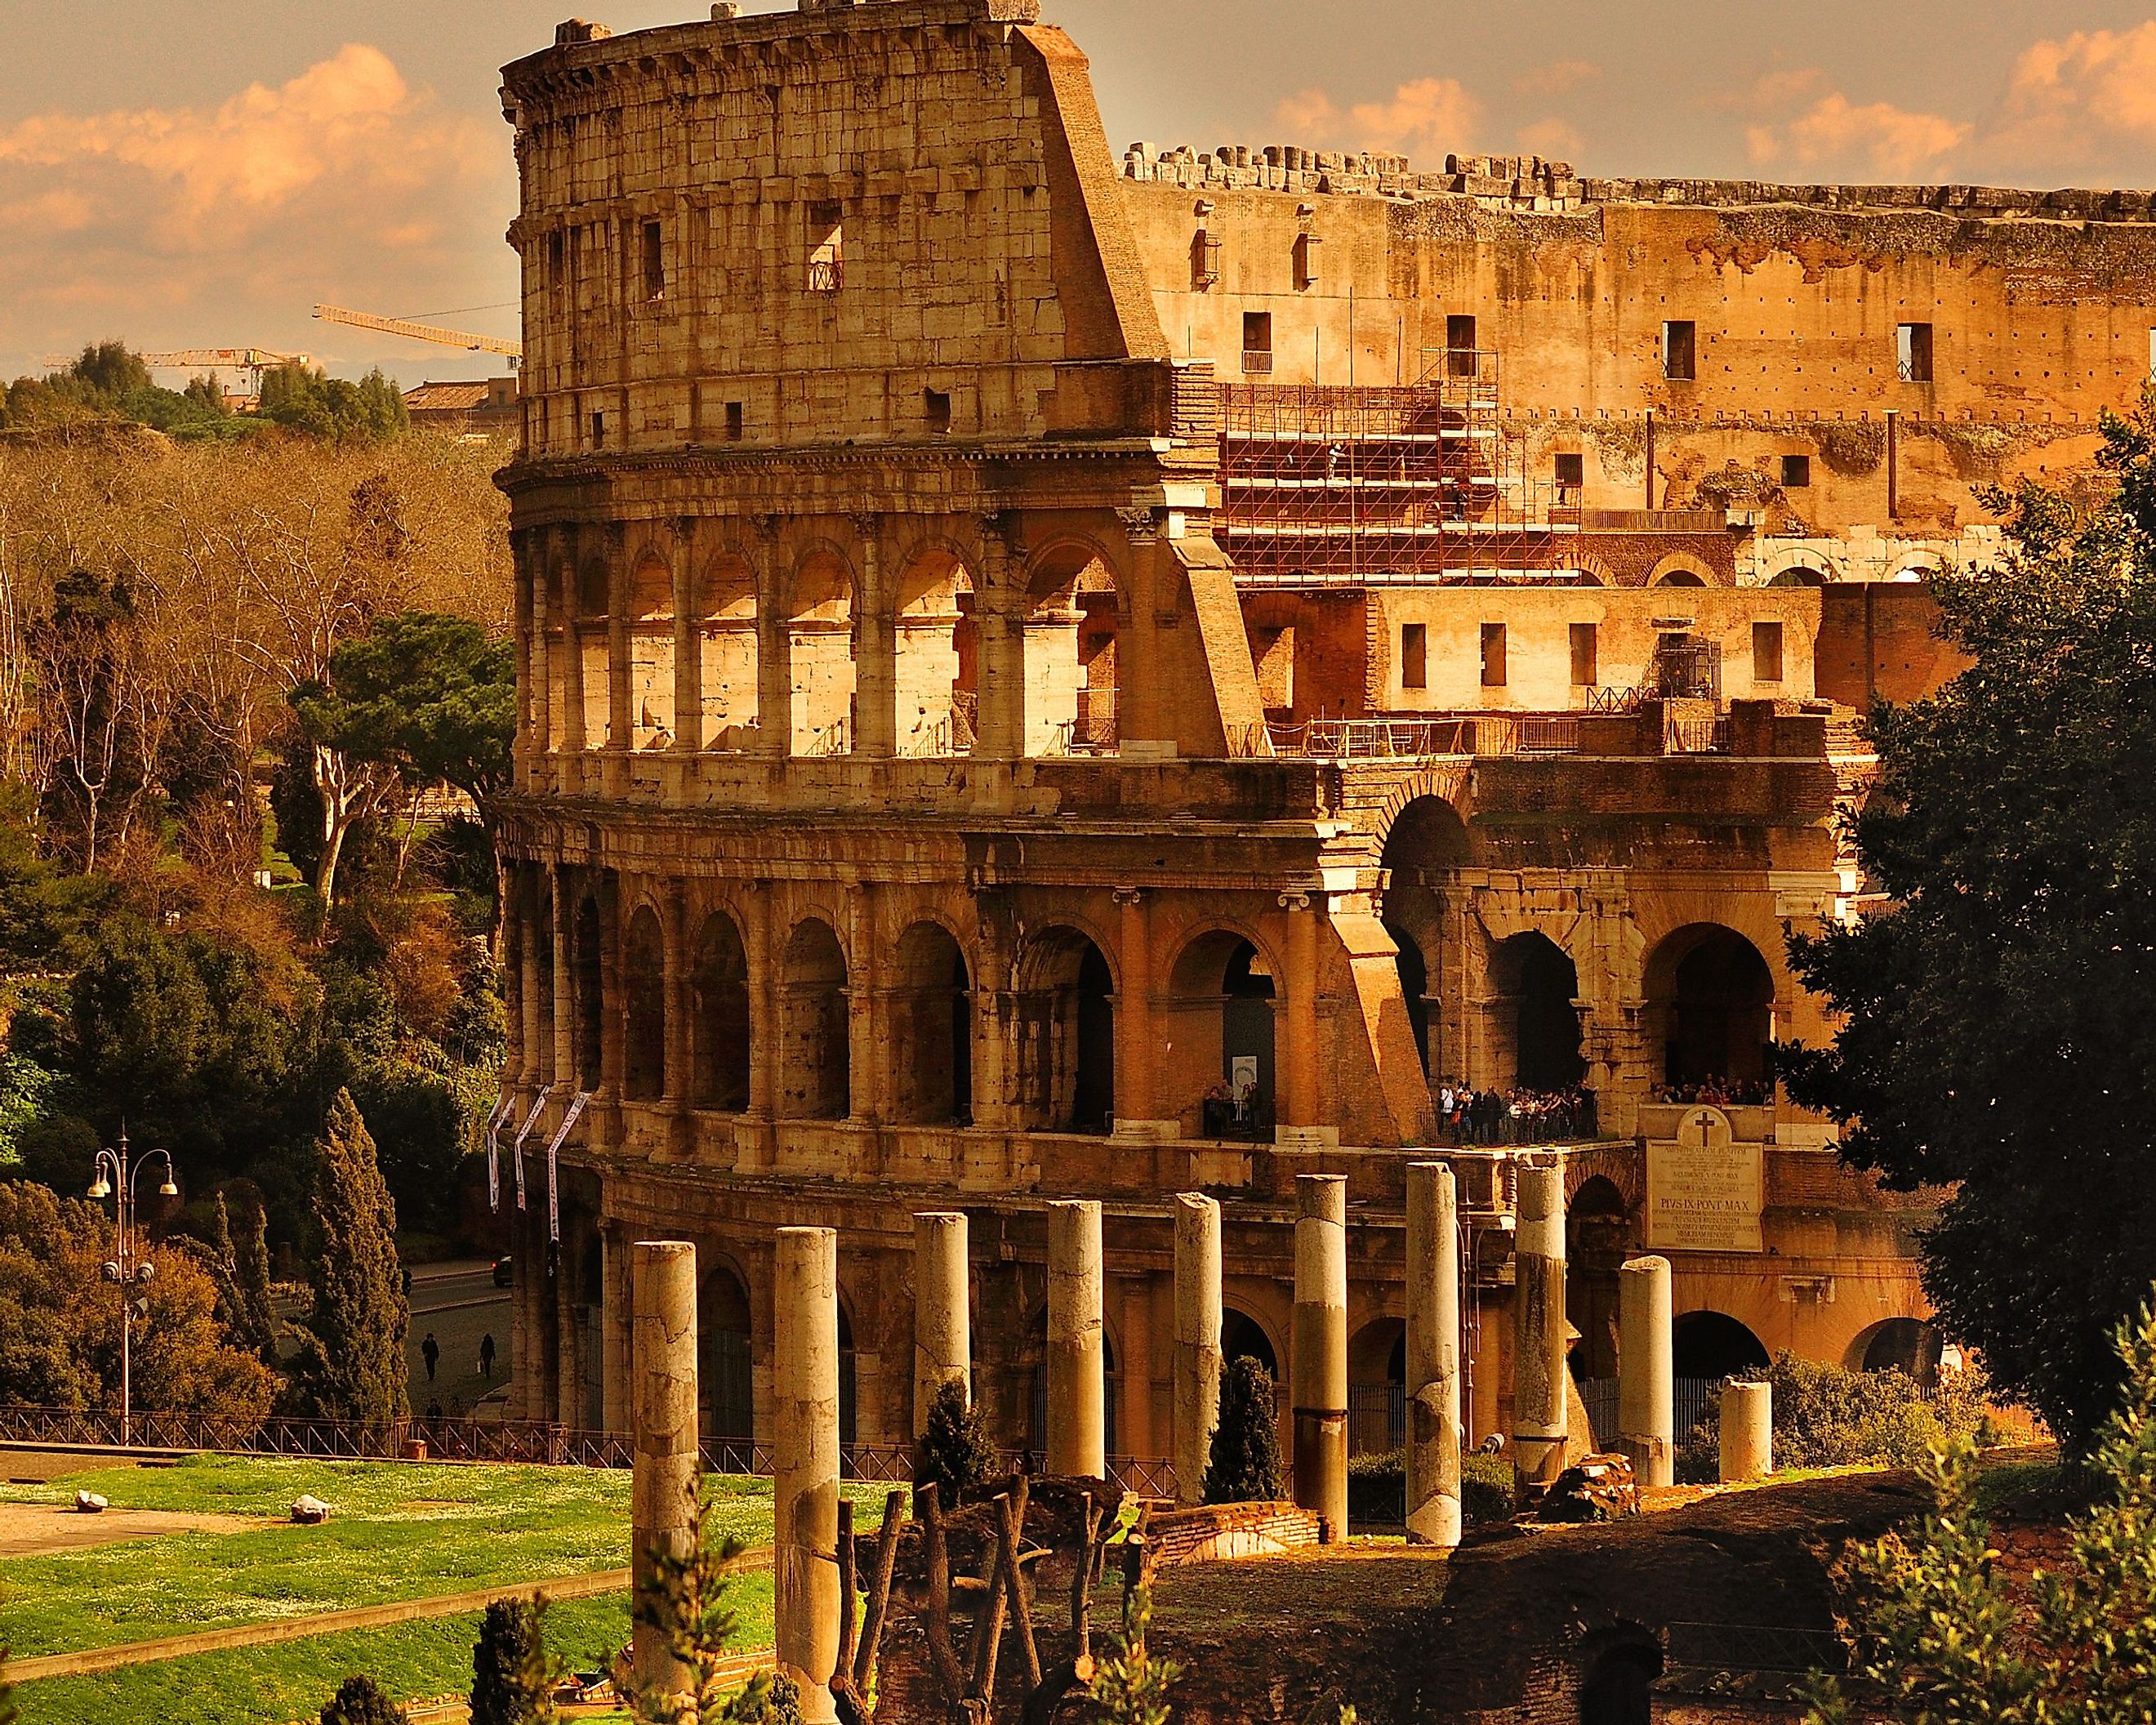 View of Rome, Italy - Coliseum. Image credit: JPF via Shutterstock